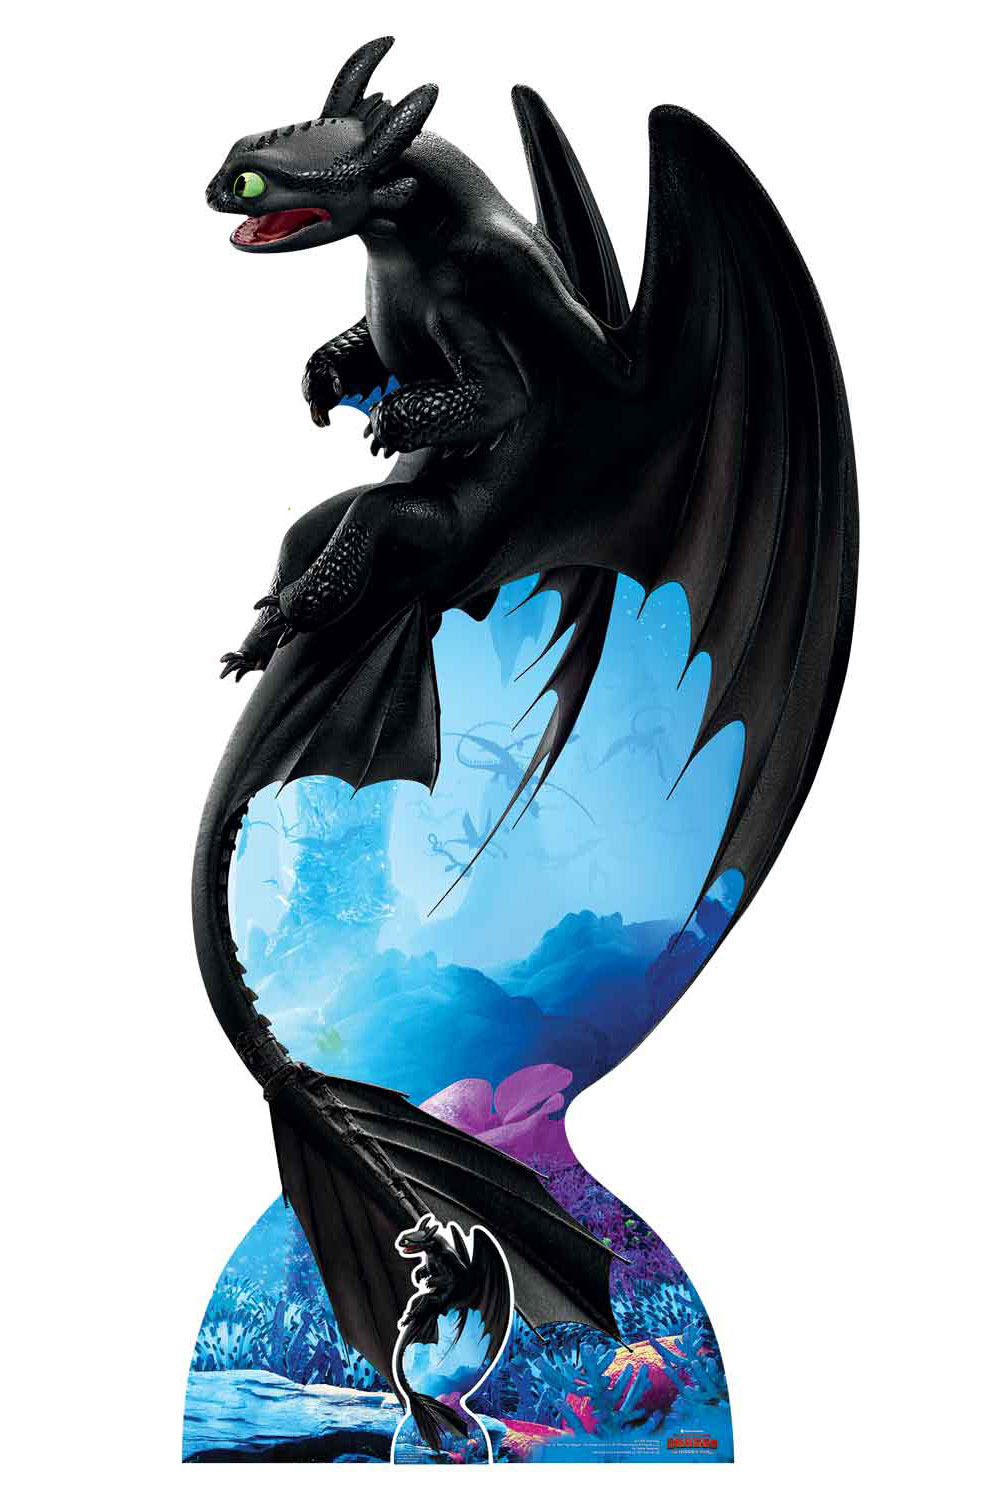 Toothless Night Fury From How To Train Your Dragon 3 Official Cardboard Cutout